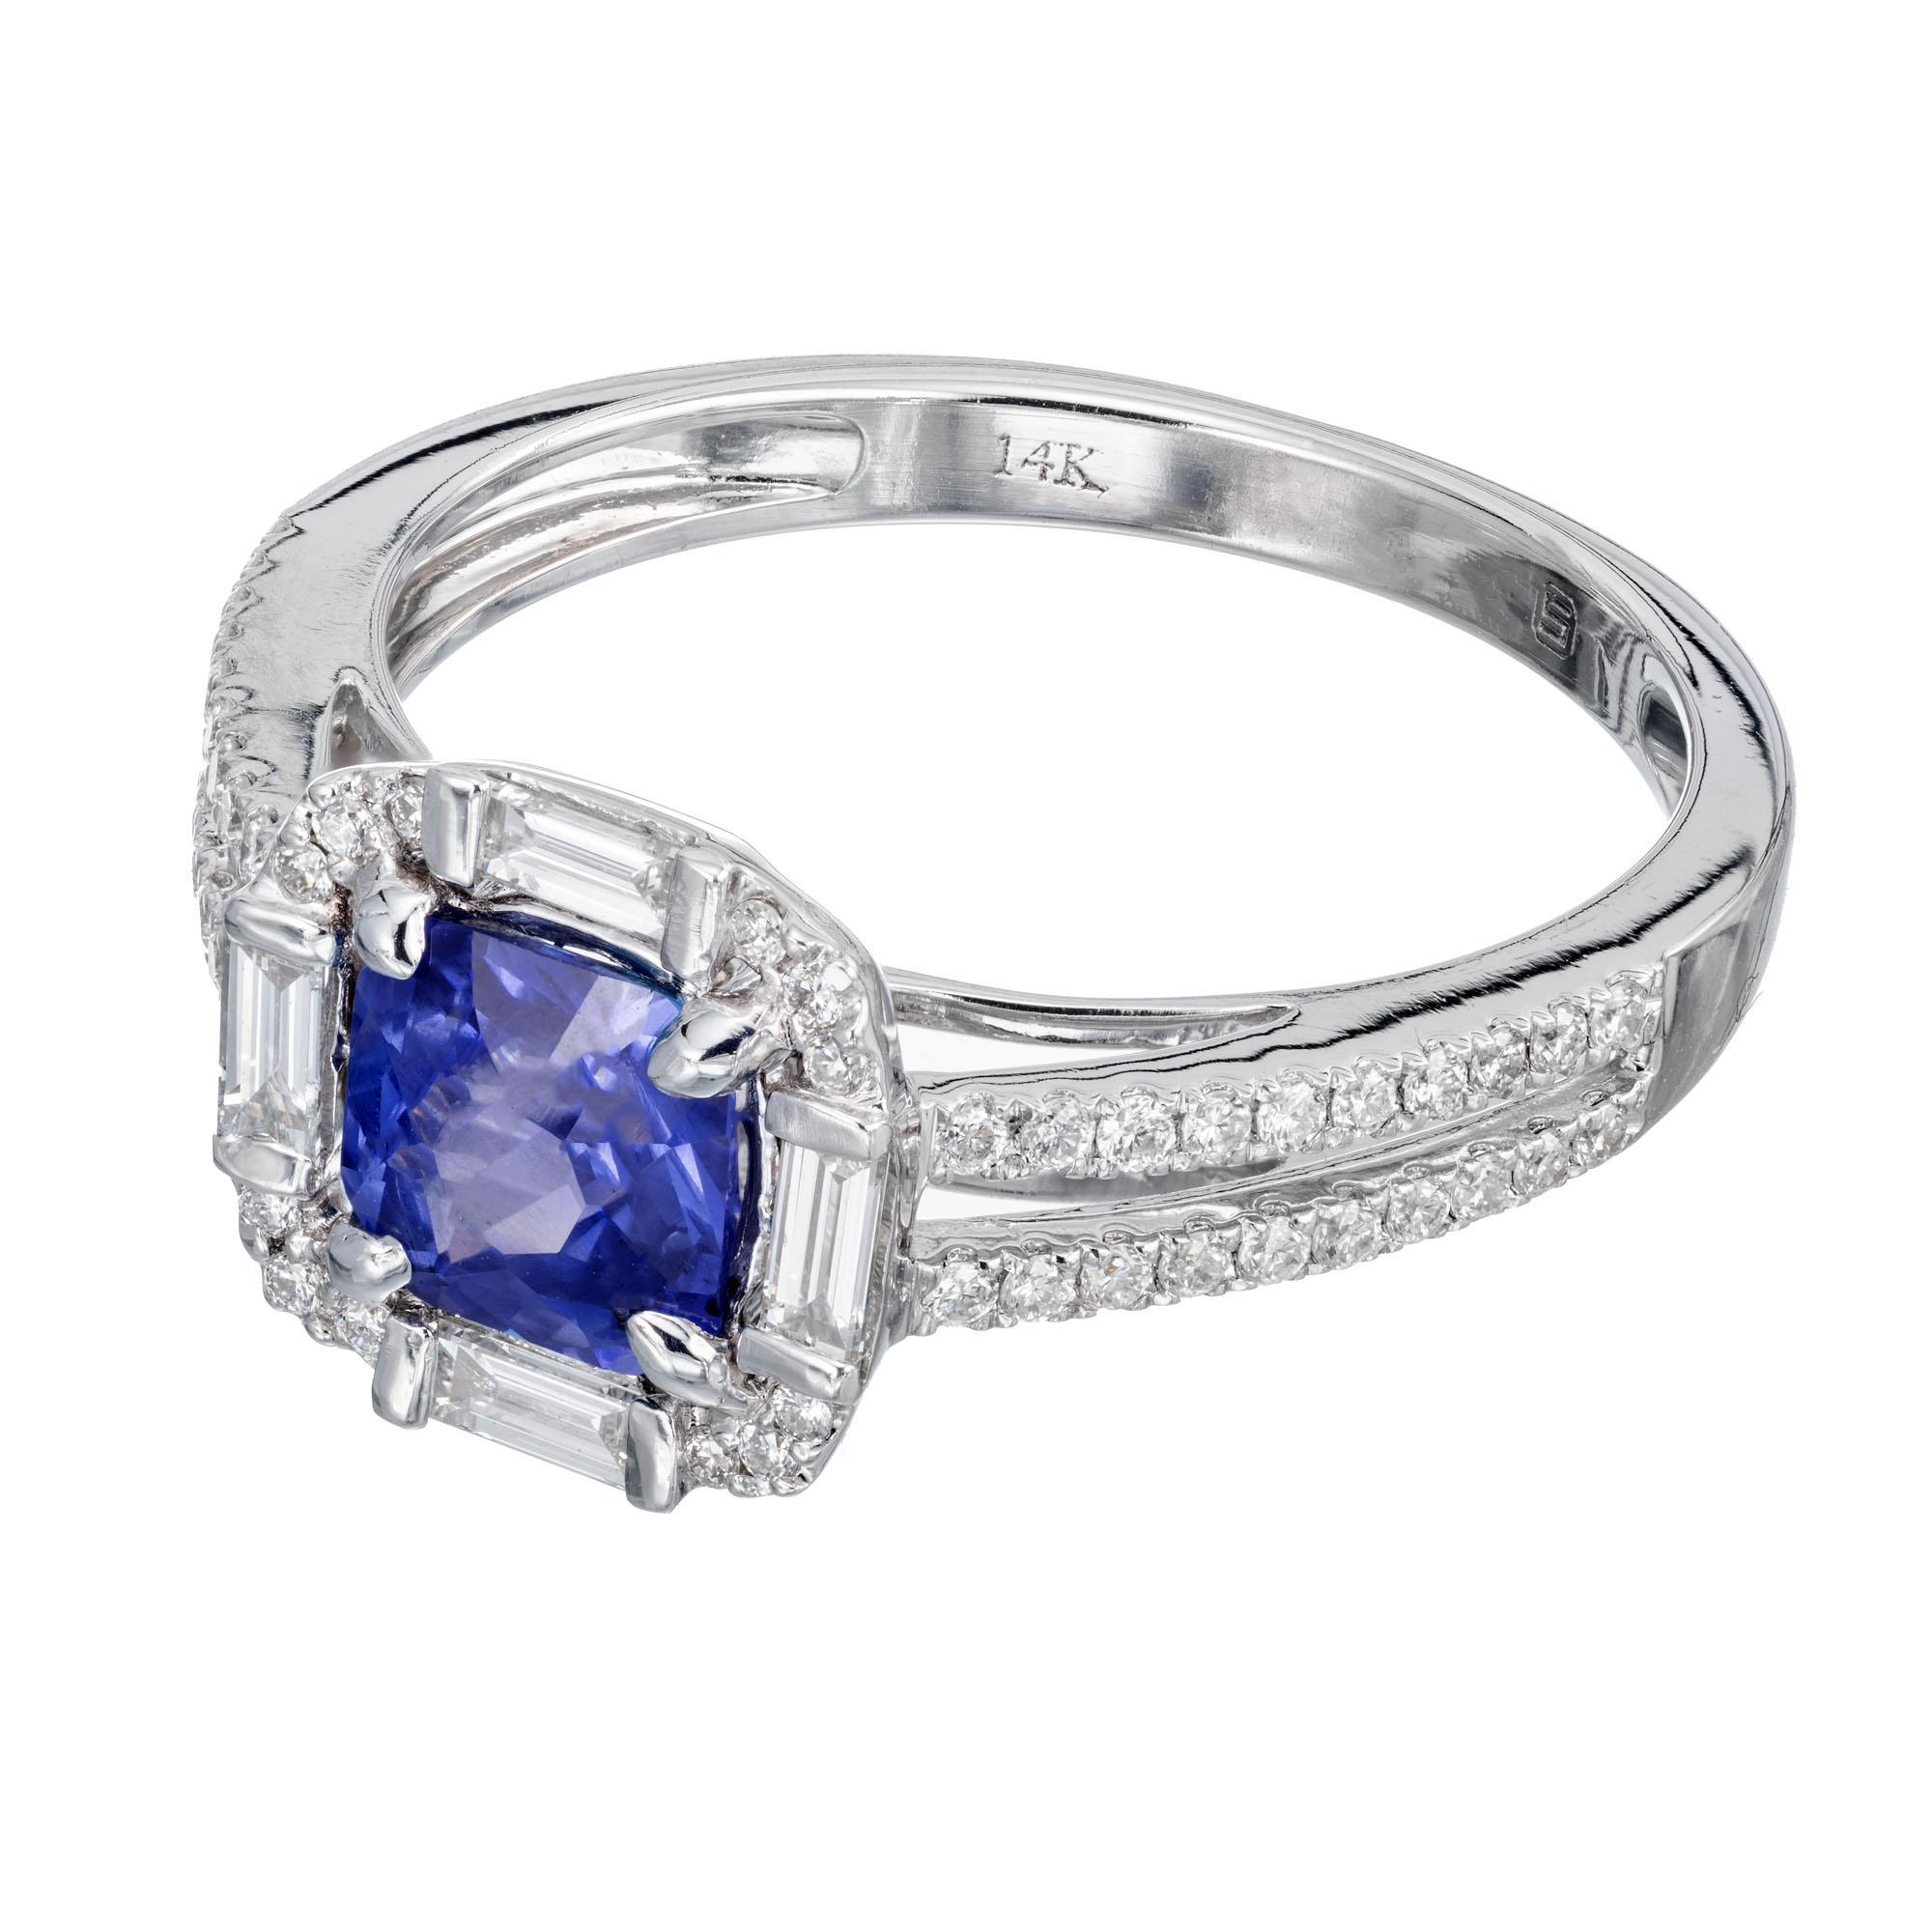 Natural GIA Certified sapphire and diamond engagement ring. Square cut center sapphire with round and step cut baguette accent diamonds in a white 14k white gold setting created in the Peter Suchy Workshop. 

1 square cut blue sapphire MI, approx.